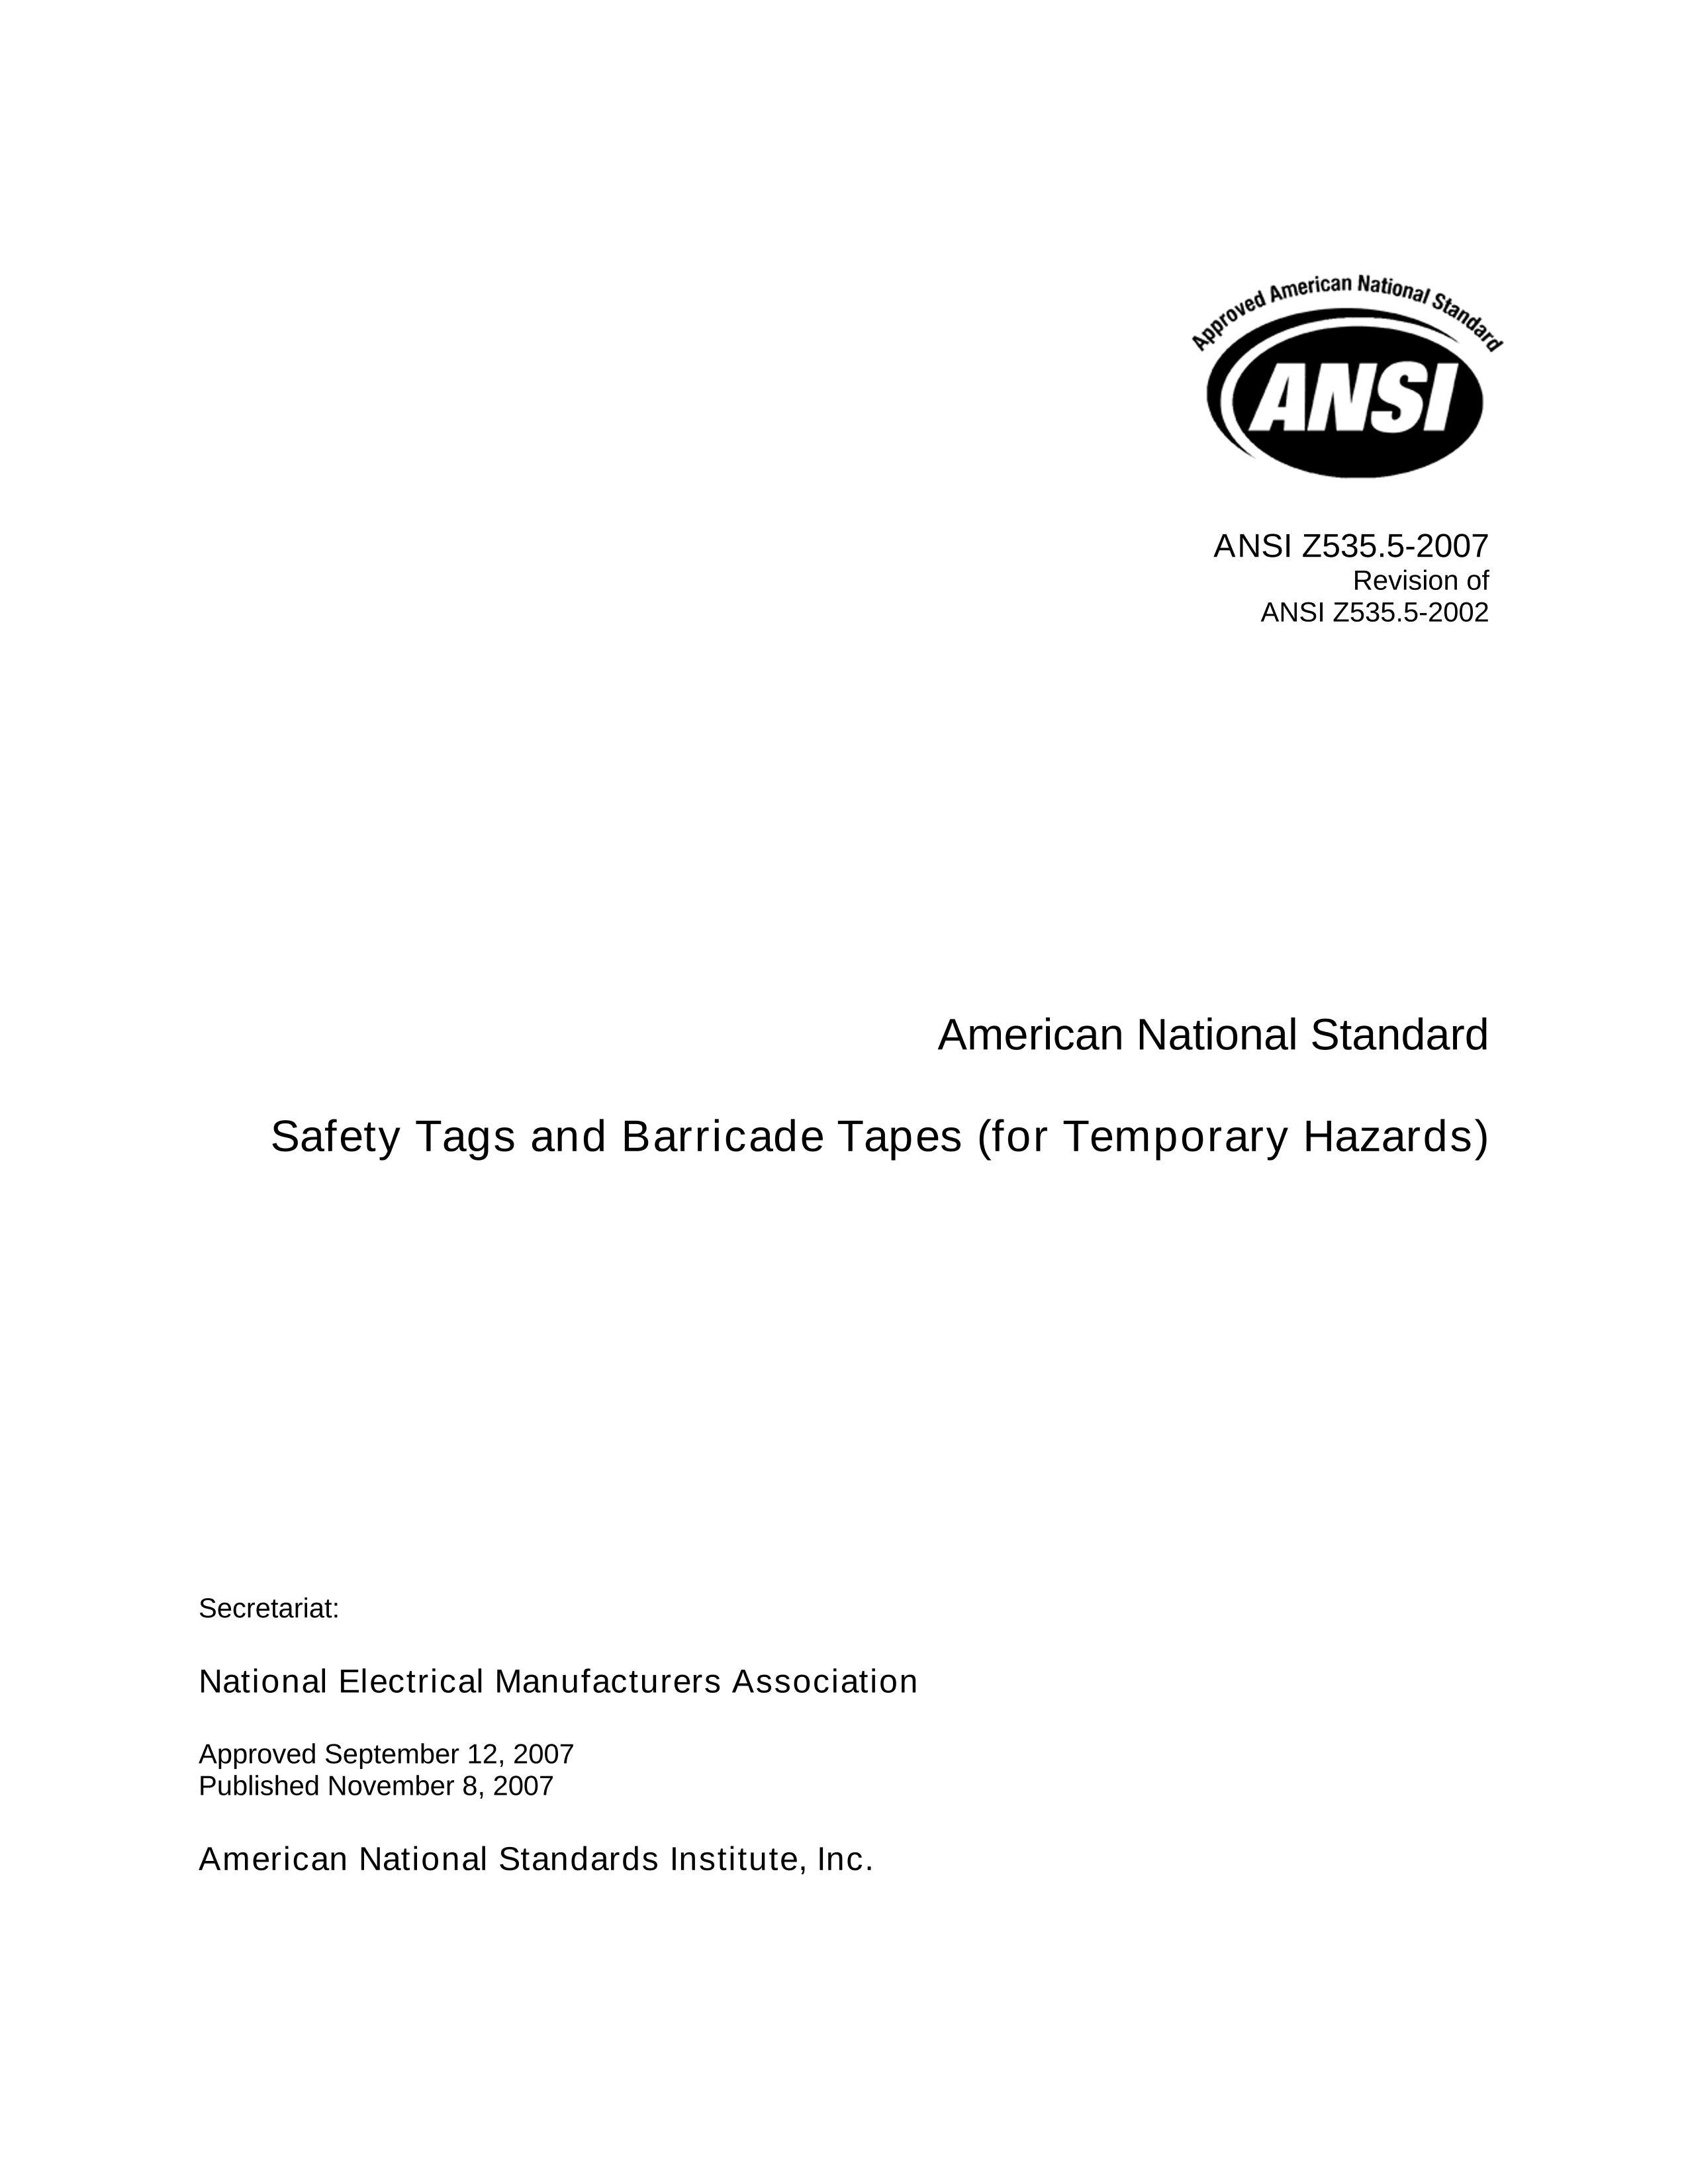 ANSI Z535.5-2007 American National Standard Safety Tags and Barricade Tapes.pdf3ҳ